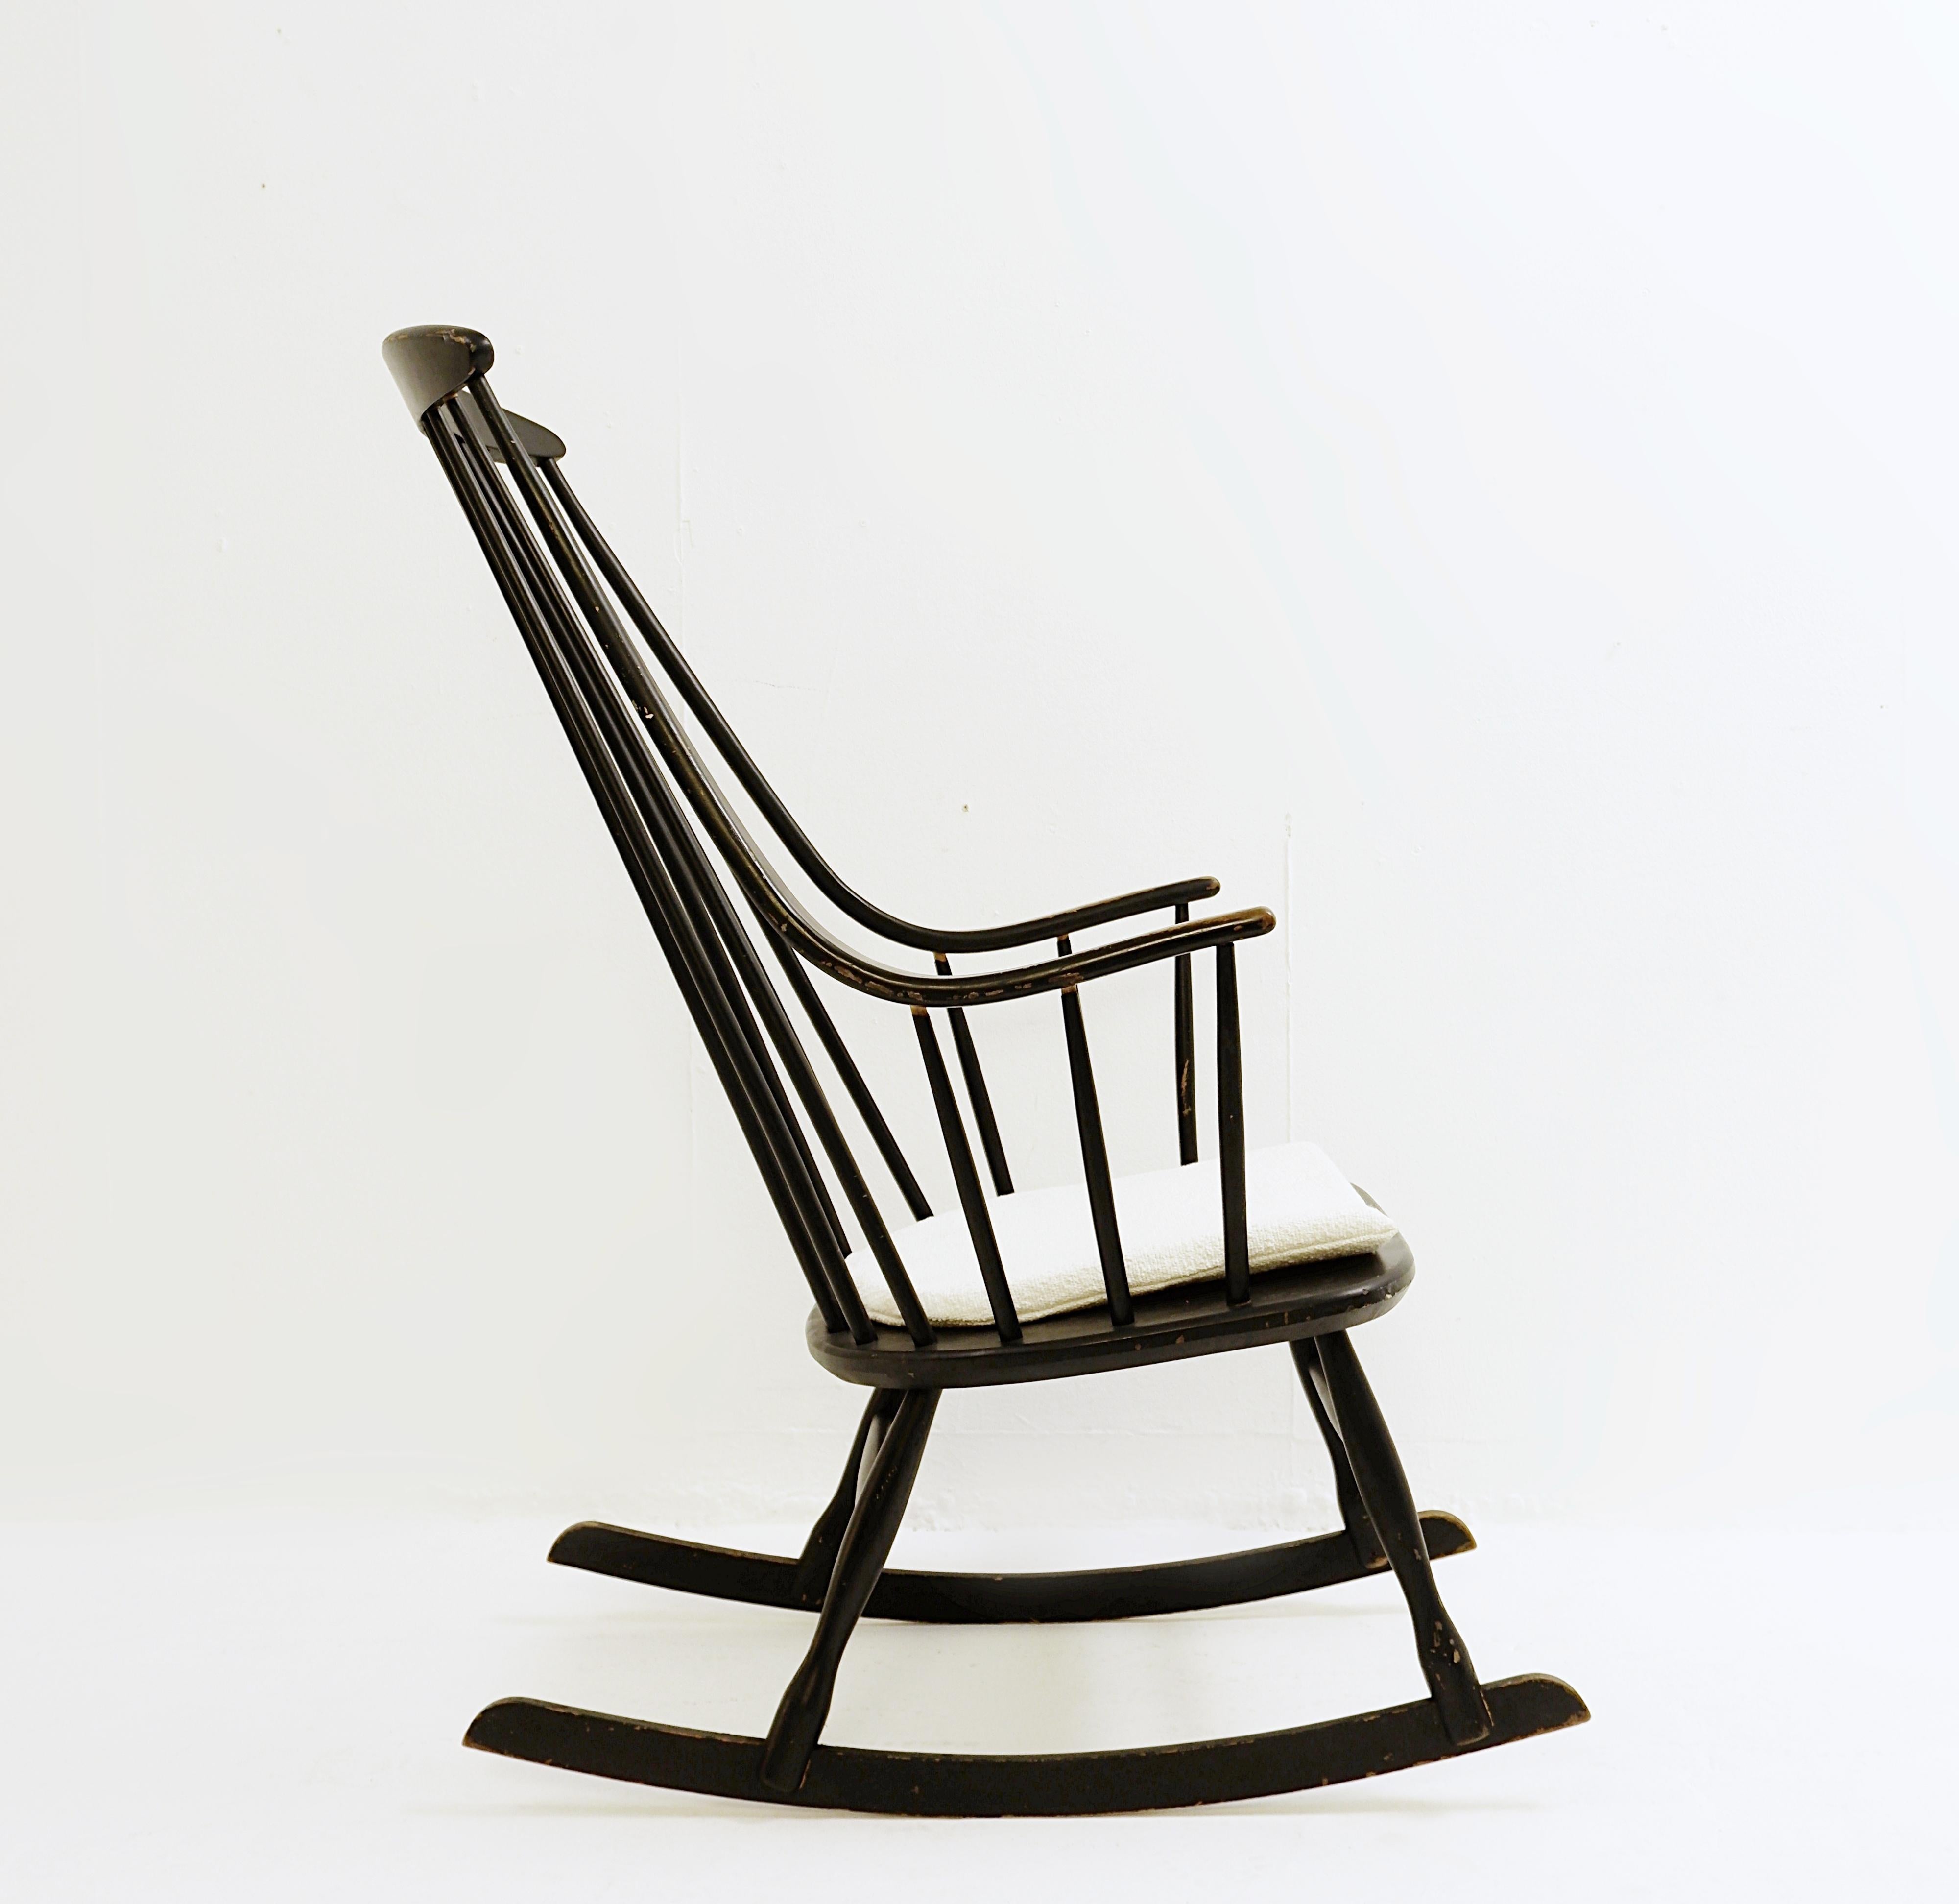 Midcentury Rocking Chair by Lena Larsson for Nesto - 1960s.